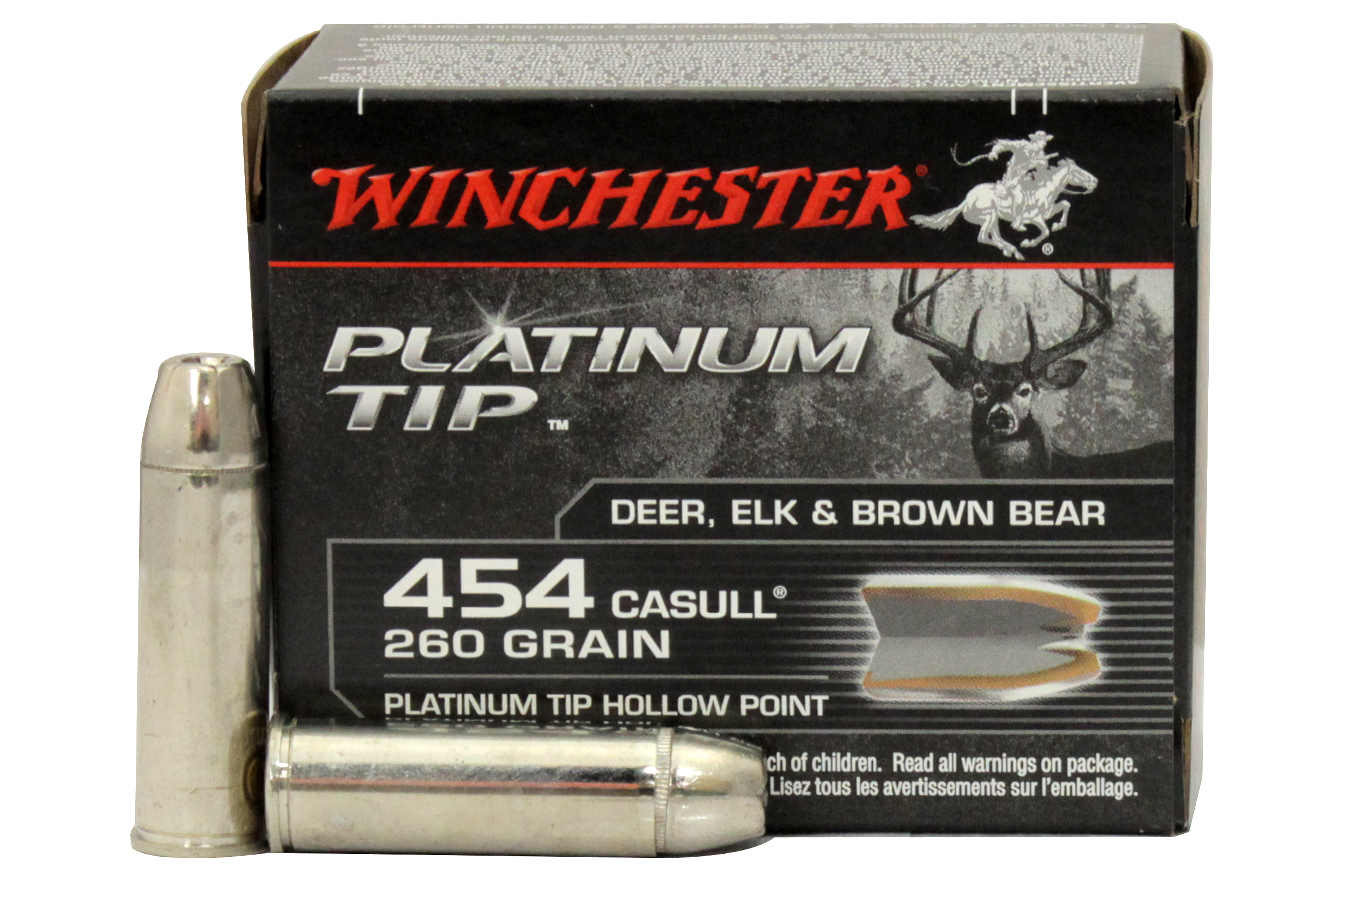 WINCHESTER AMMO 454 CASULL 260 GR PLATINUM TIP HOLLOW POINT